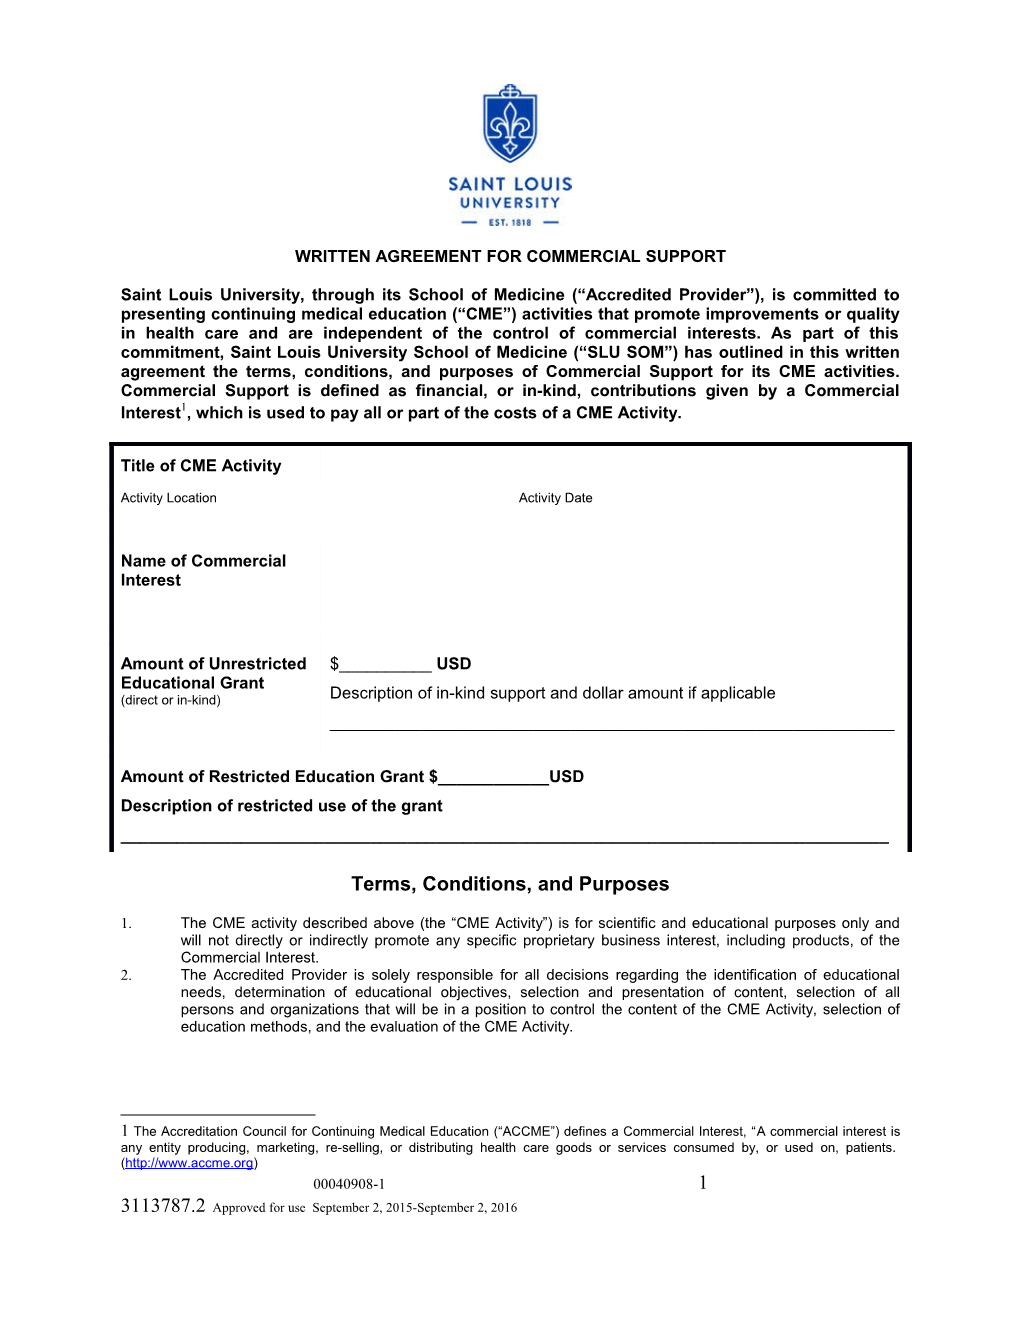 SLU Template Revised Written Agreement for Commercial Support (Willmore) 2015-2016 CME